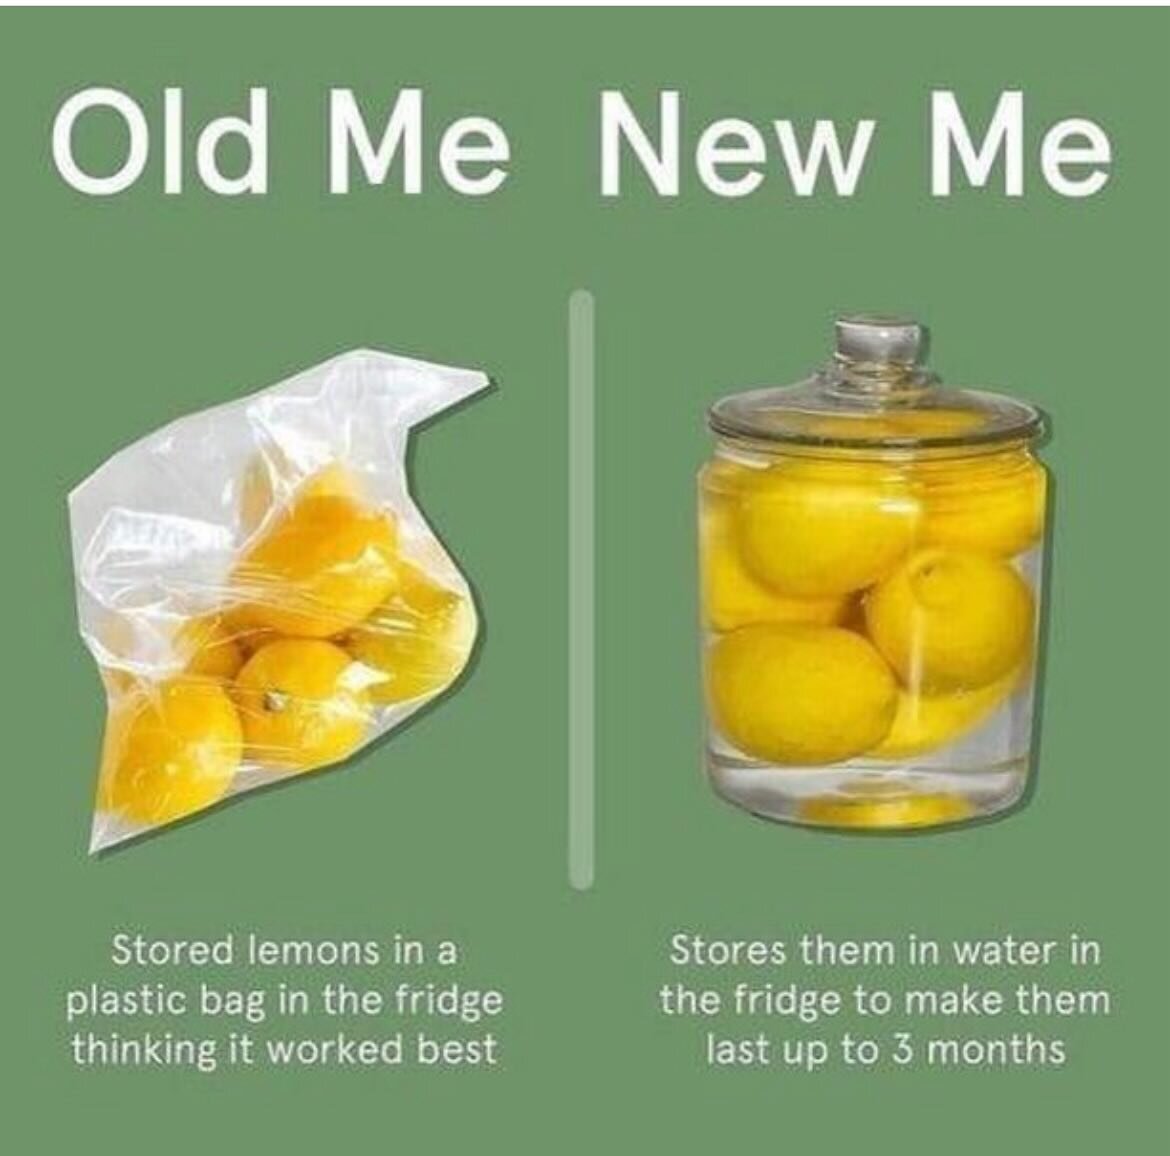 Your waste less Wednesday food tip.  Store your lemons in a jar with water to make them last longer.  #wastelesswednesday #foodwasteprevention #foodwastereduction #nonprofit #lemons